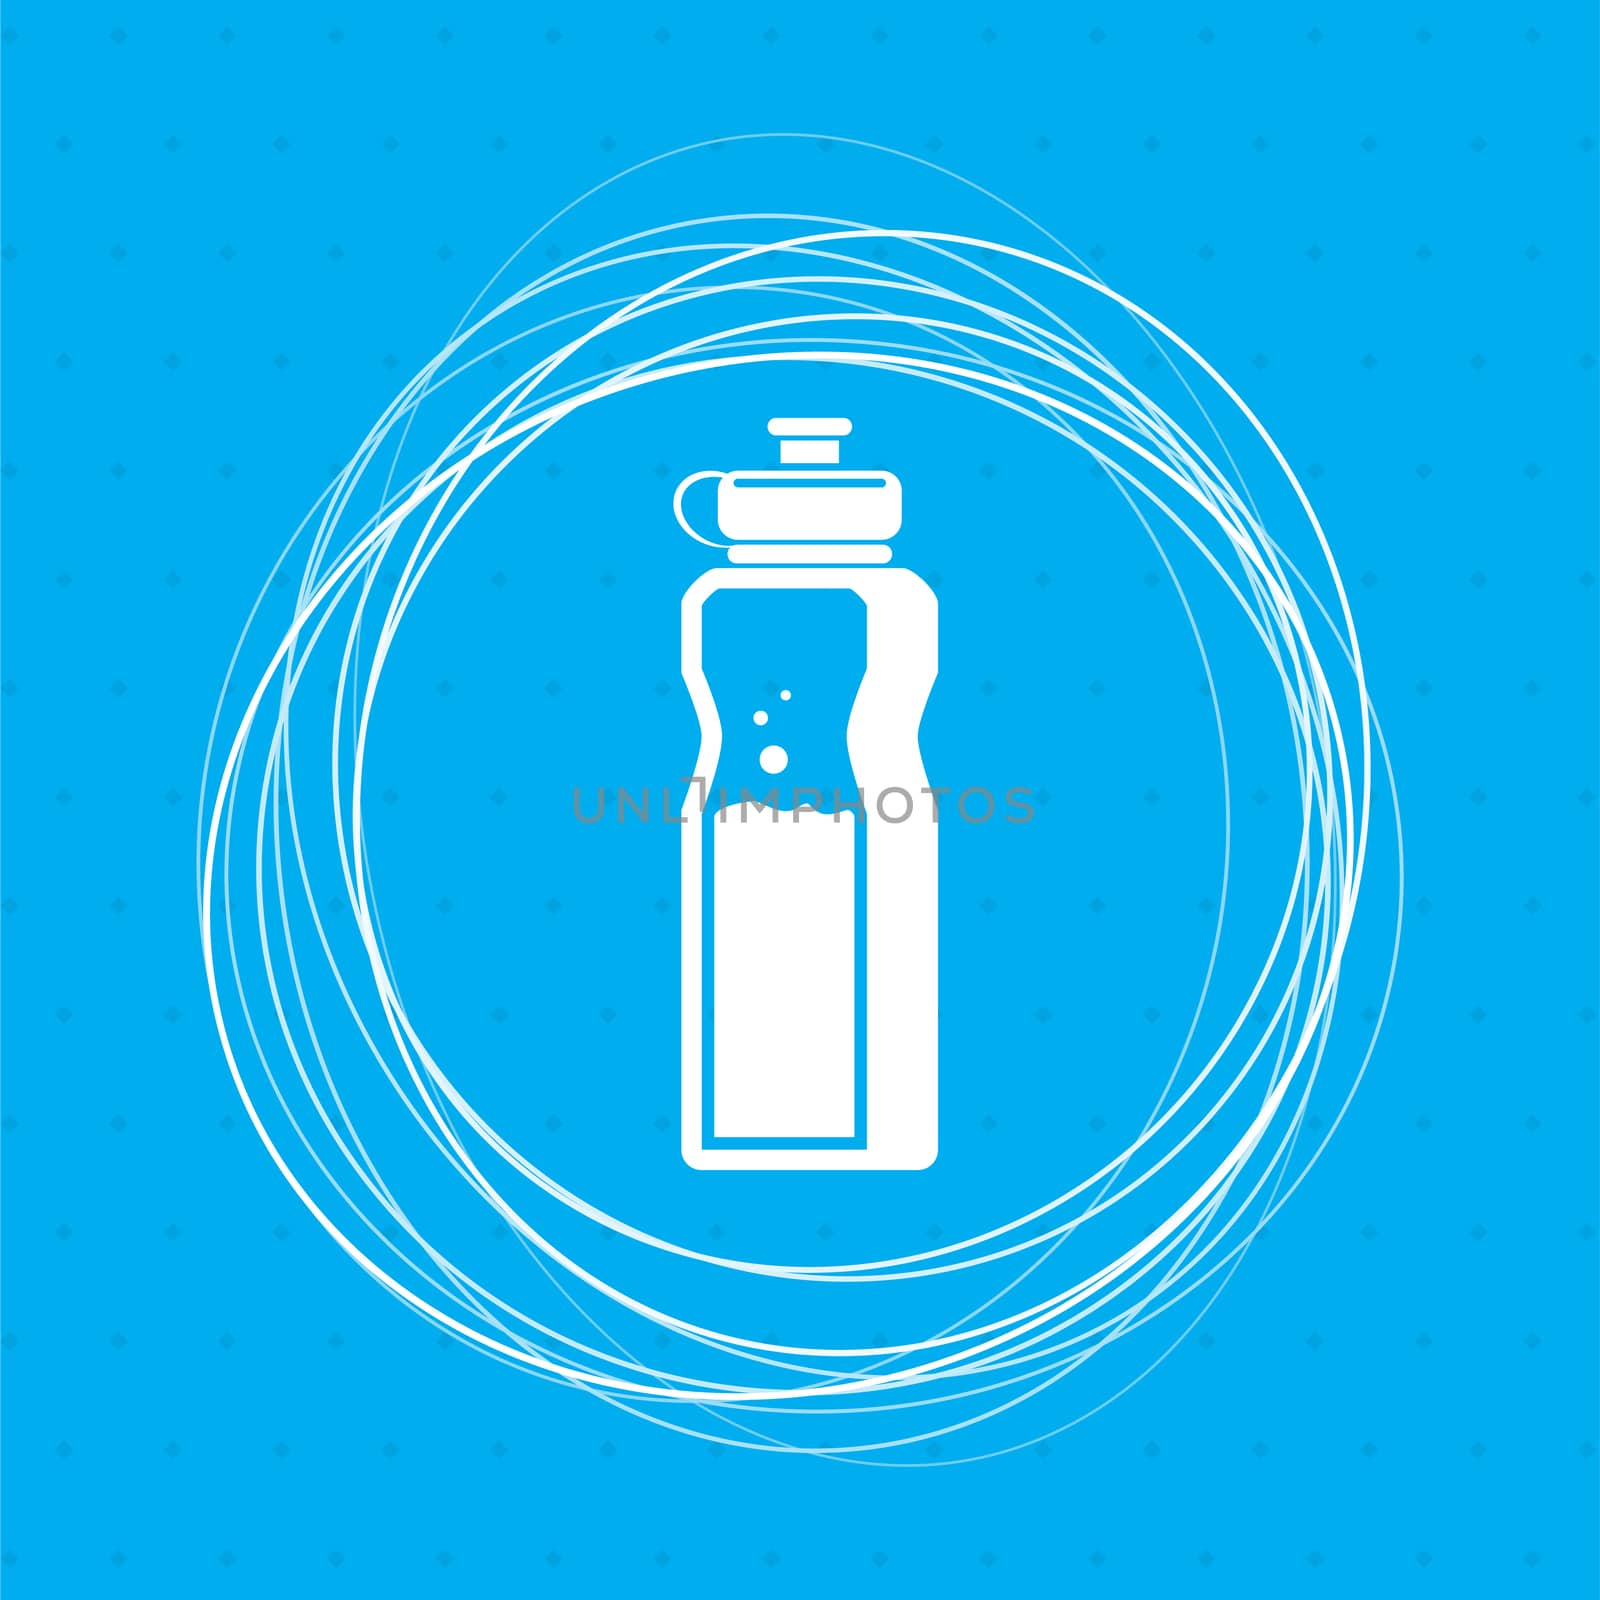 bottle of water icon on a blue background with abstract circles around and place for your text. illustration